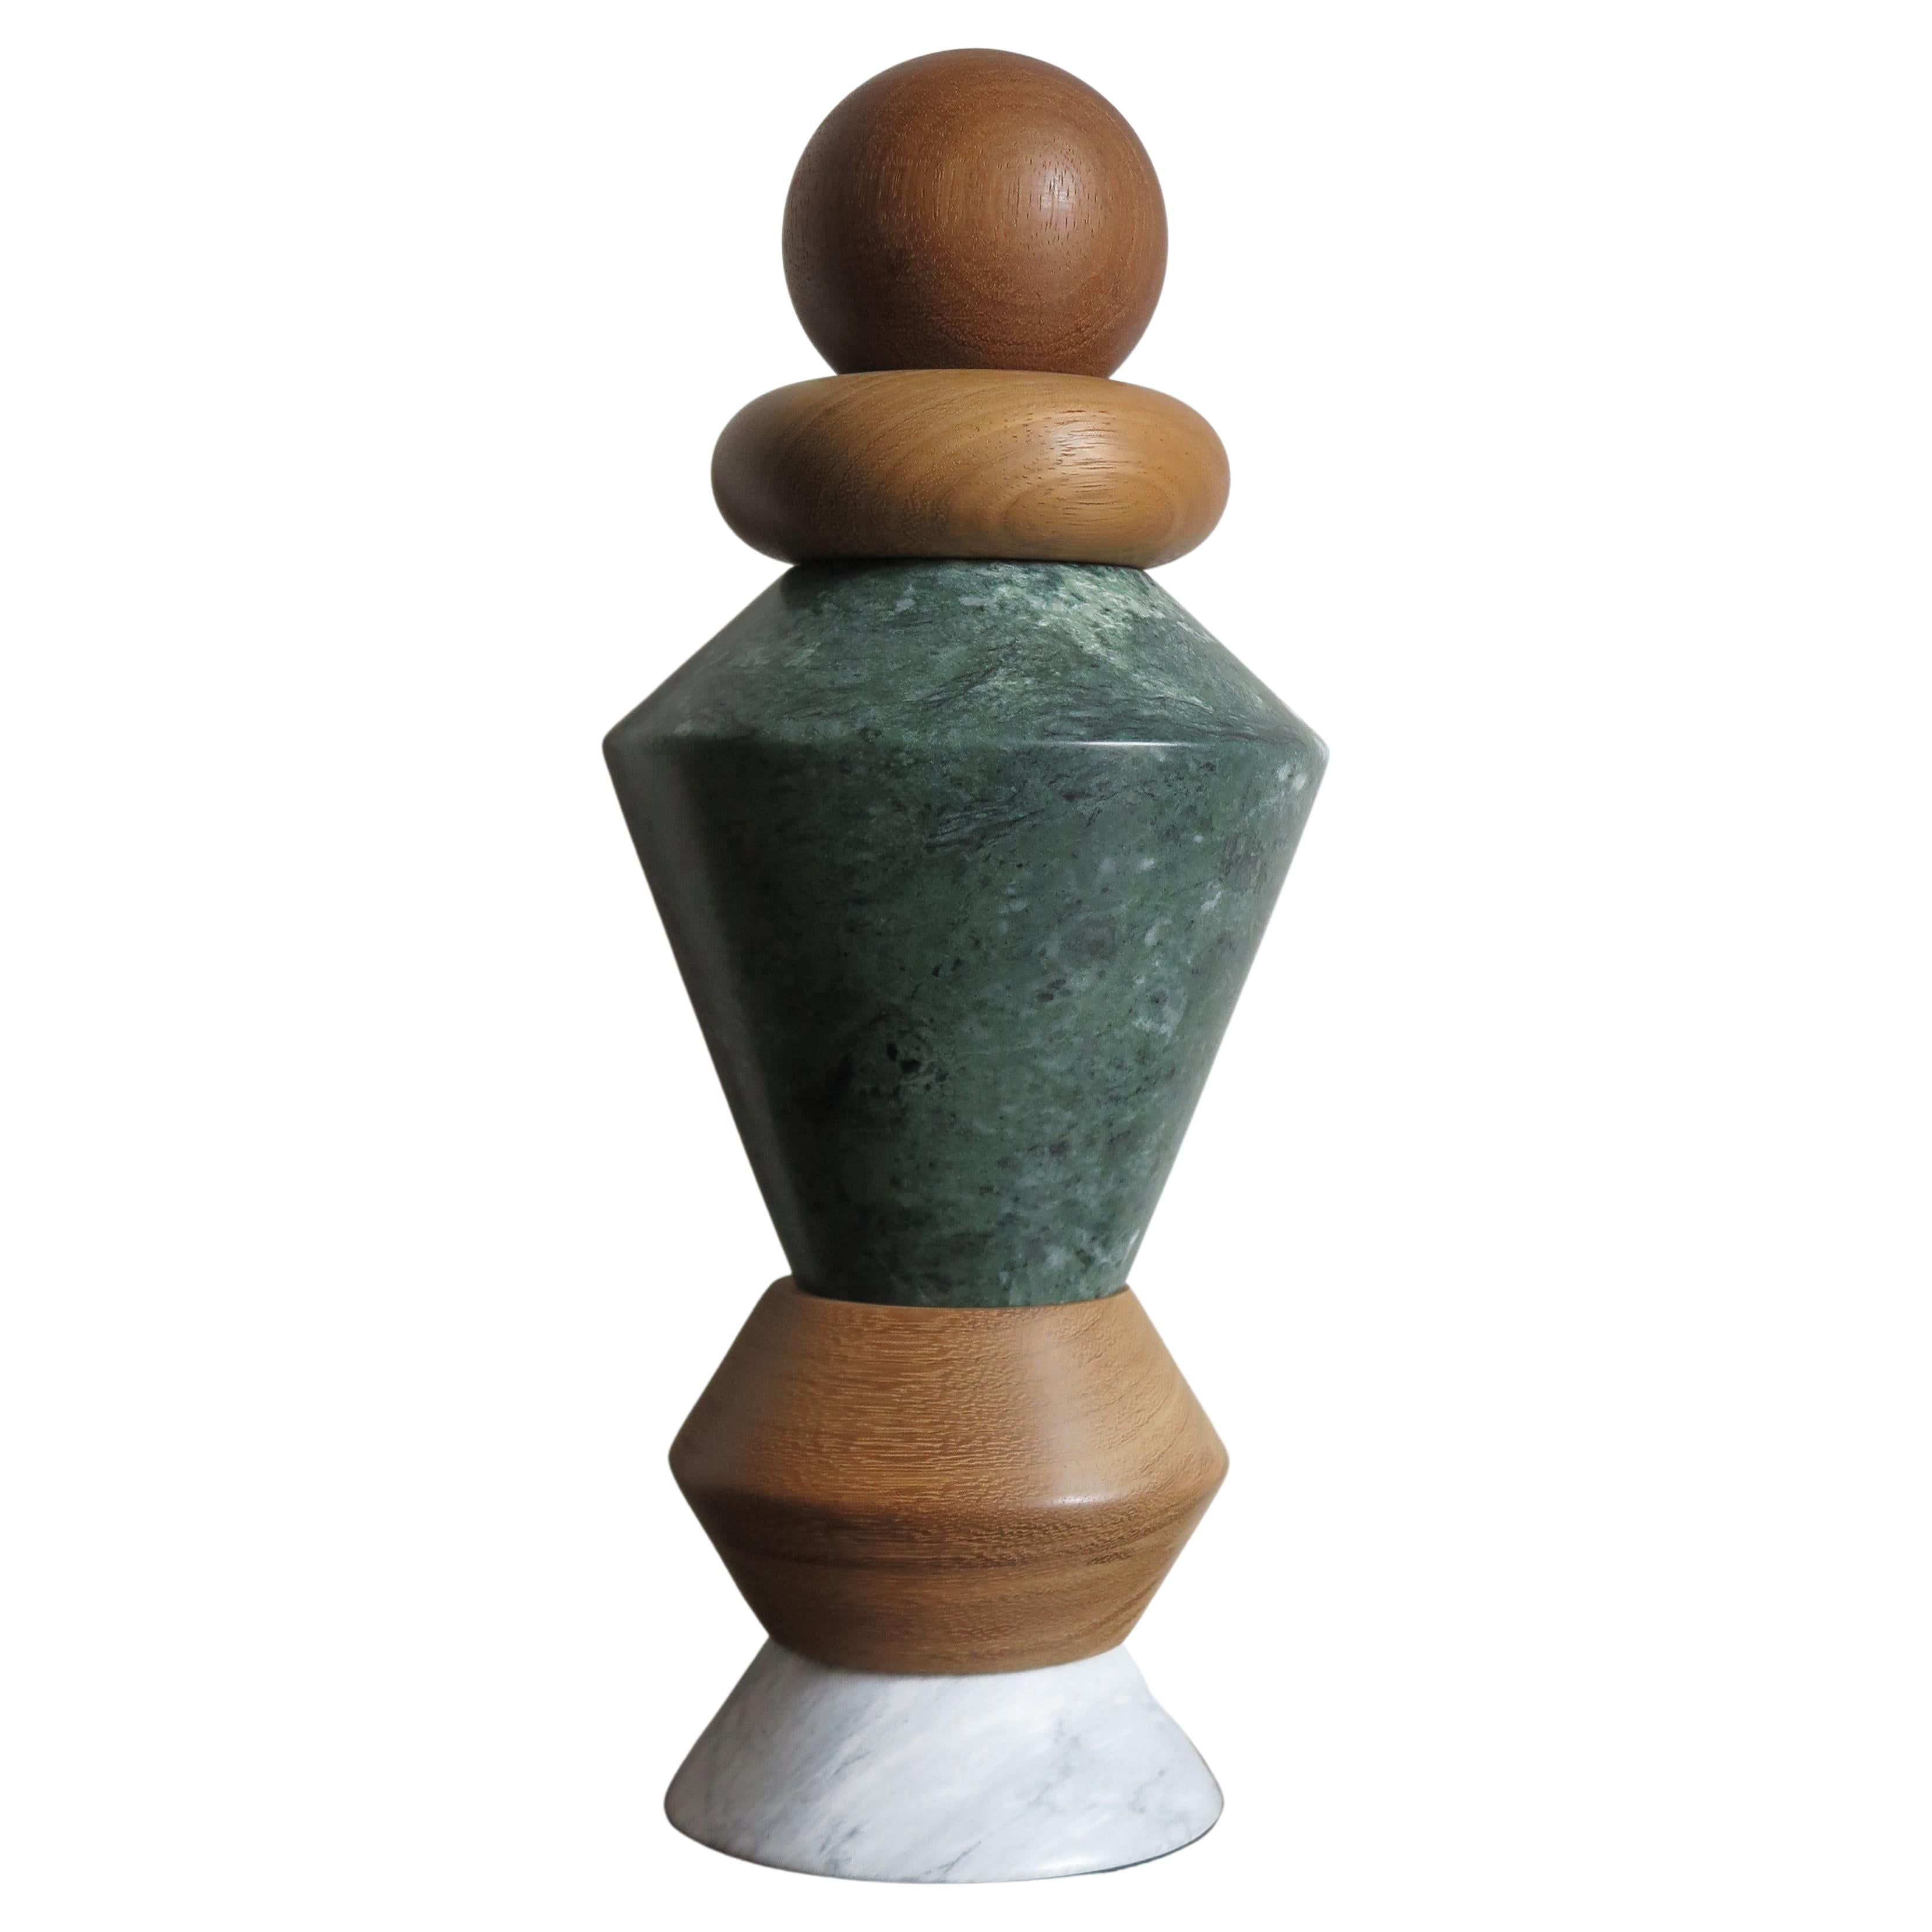 Contemporary Italian Marble and Wood Sculpture, Flower Vase "iTotem"